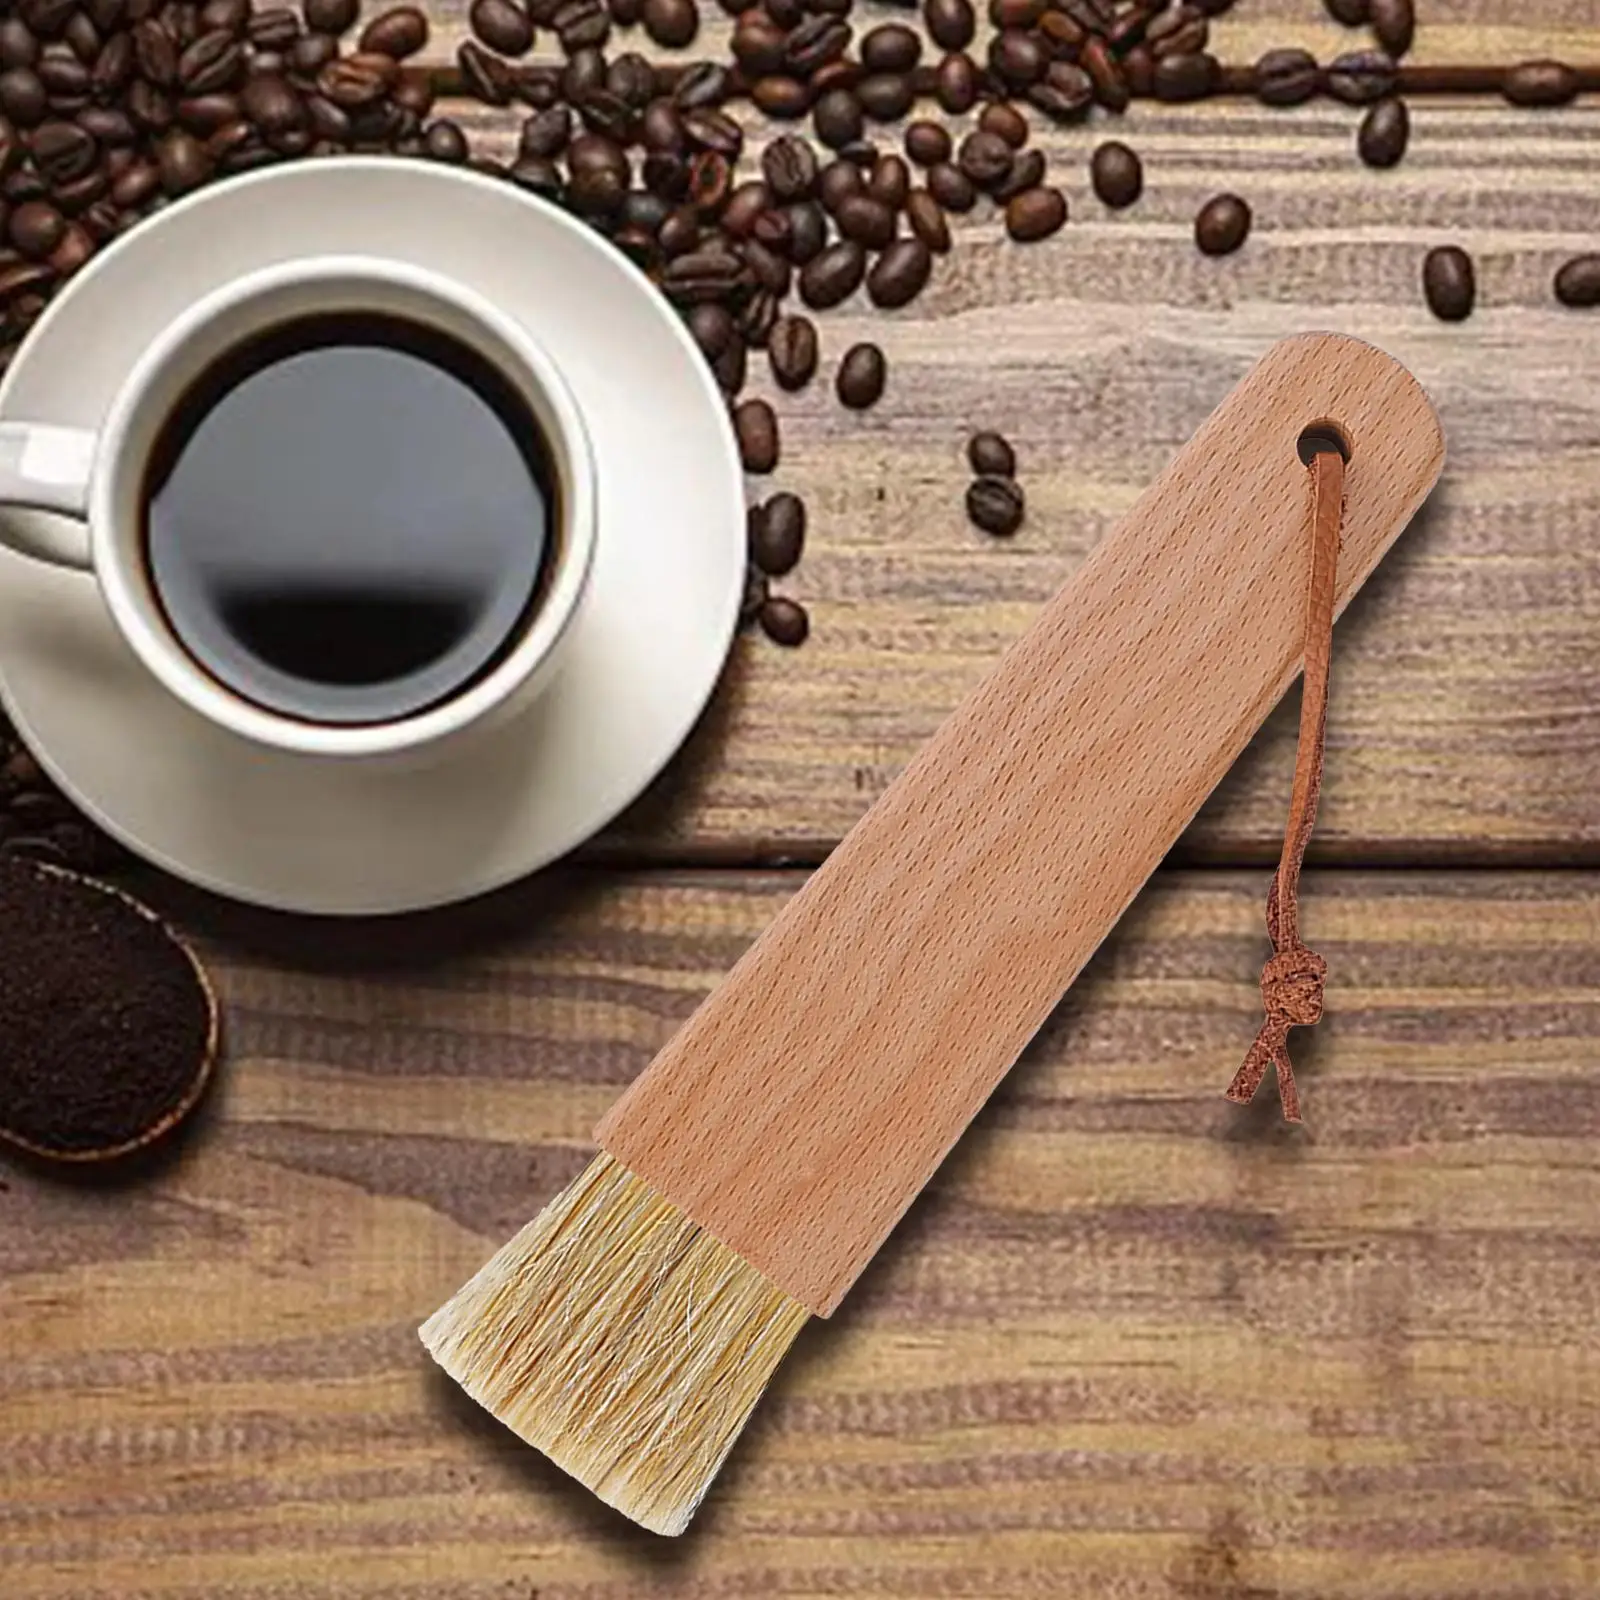 Dusting Brush Tool Espresso Accessories Supplies Easy to Wash and 